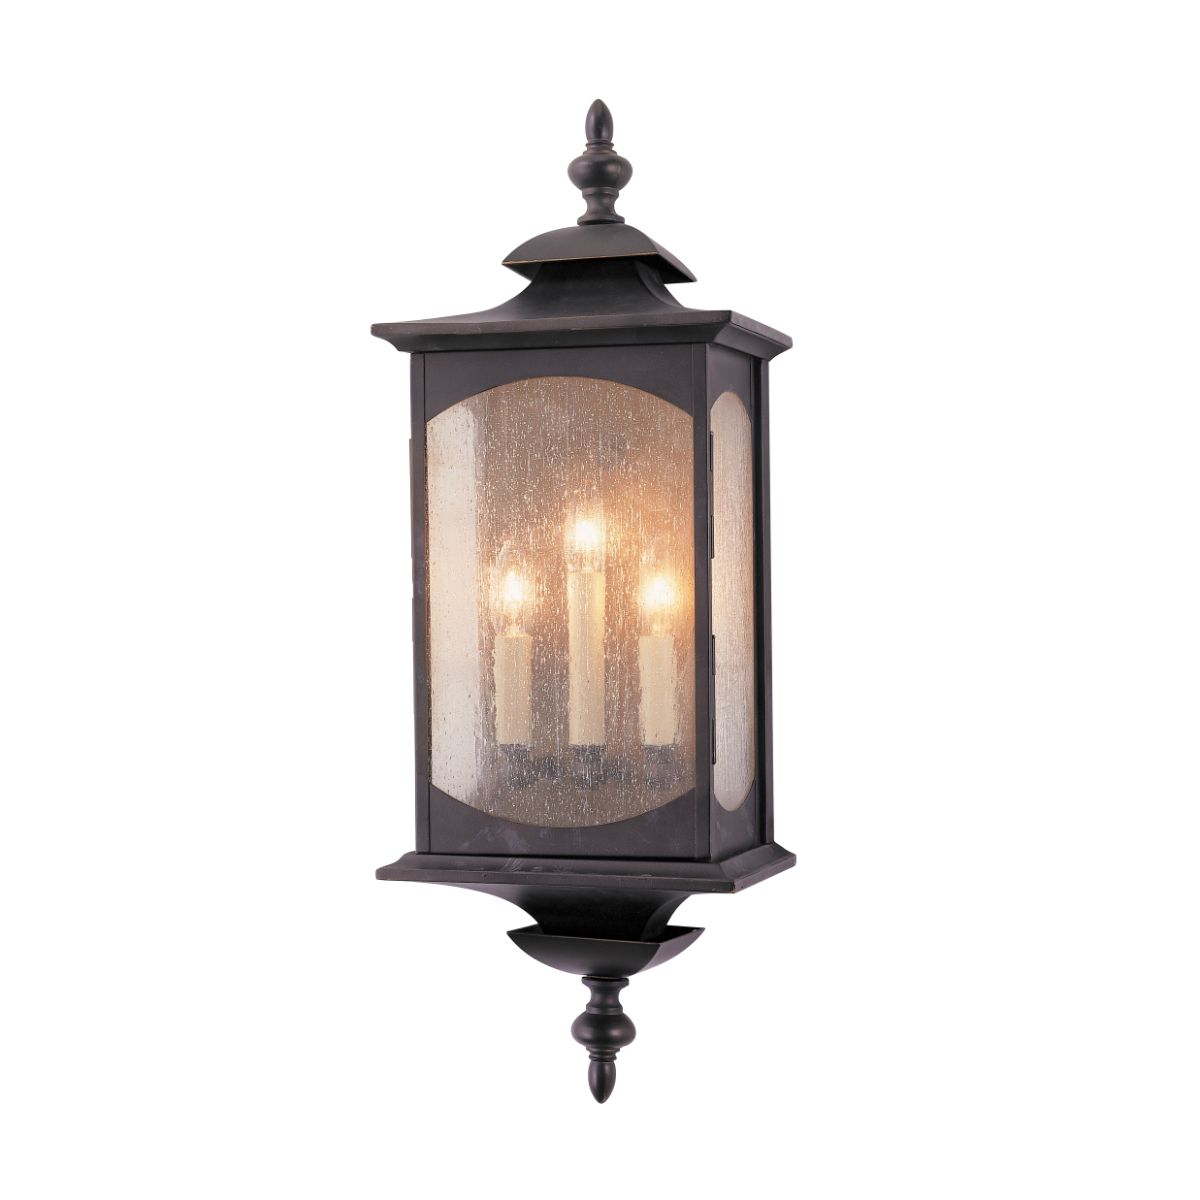 Market Square 25 In. 3 Lights Outdoor Wall Sconce Bronze Finish